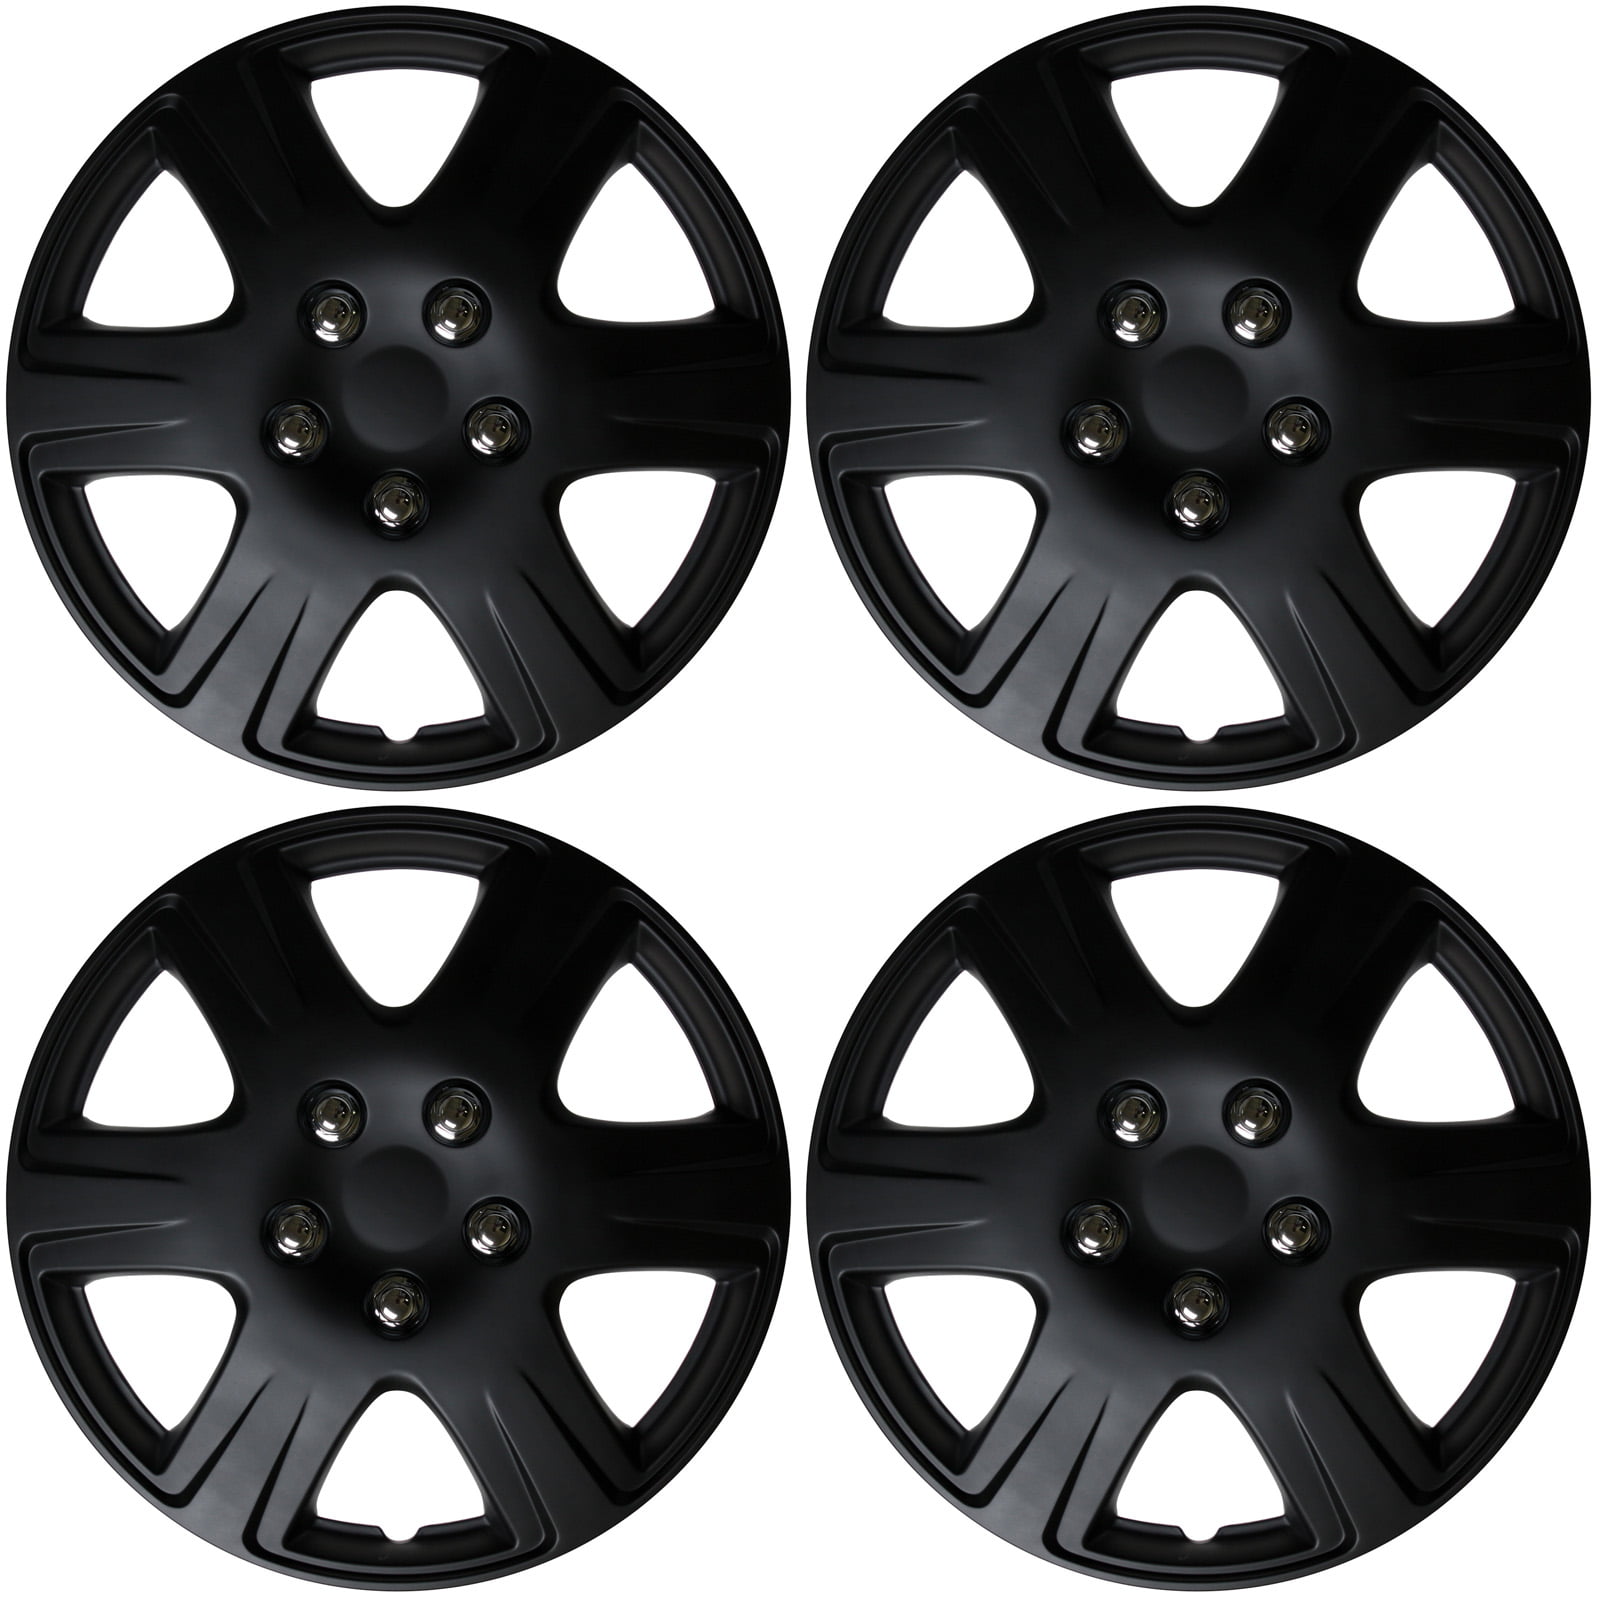 Valve caps & Sticker XtremeAuto® 14 Black With Red Wheel car Hub Trims Cover Set of 4 Complete with Ties